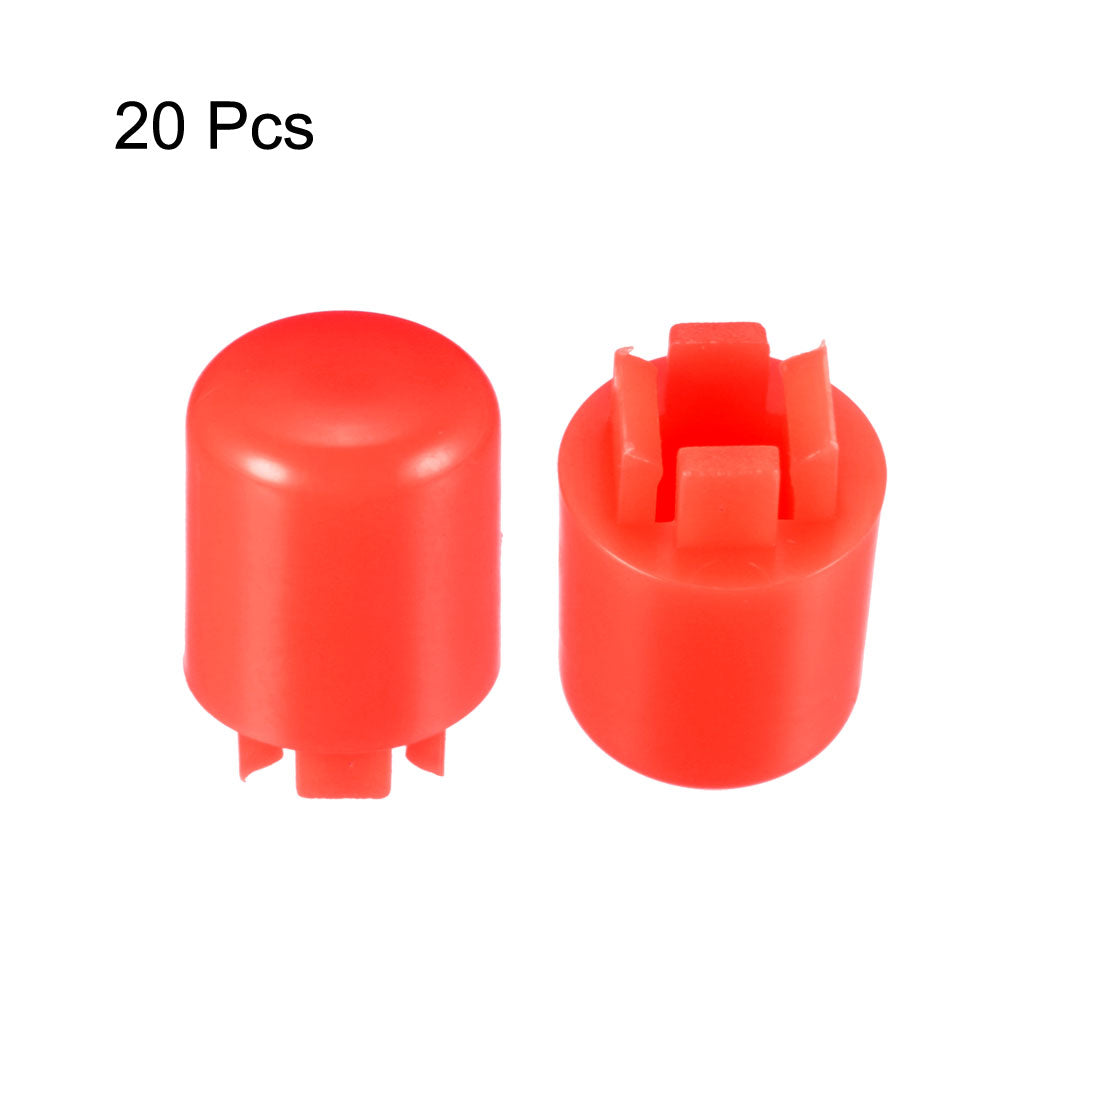 uxcell Uxcell 20Pcs Plastic Pushbutton Tactile Switch Caps Cover Keycaps Red for 12x12x7.3mm Tact Switch